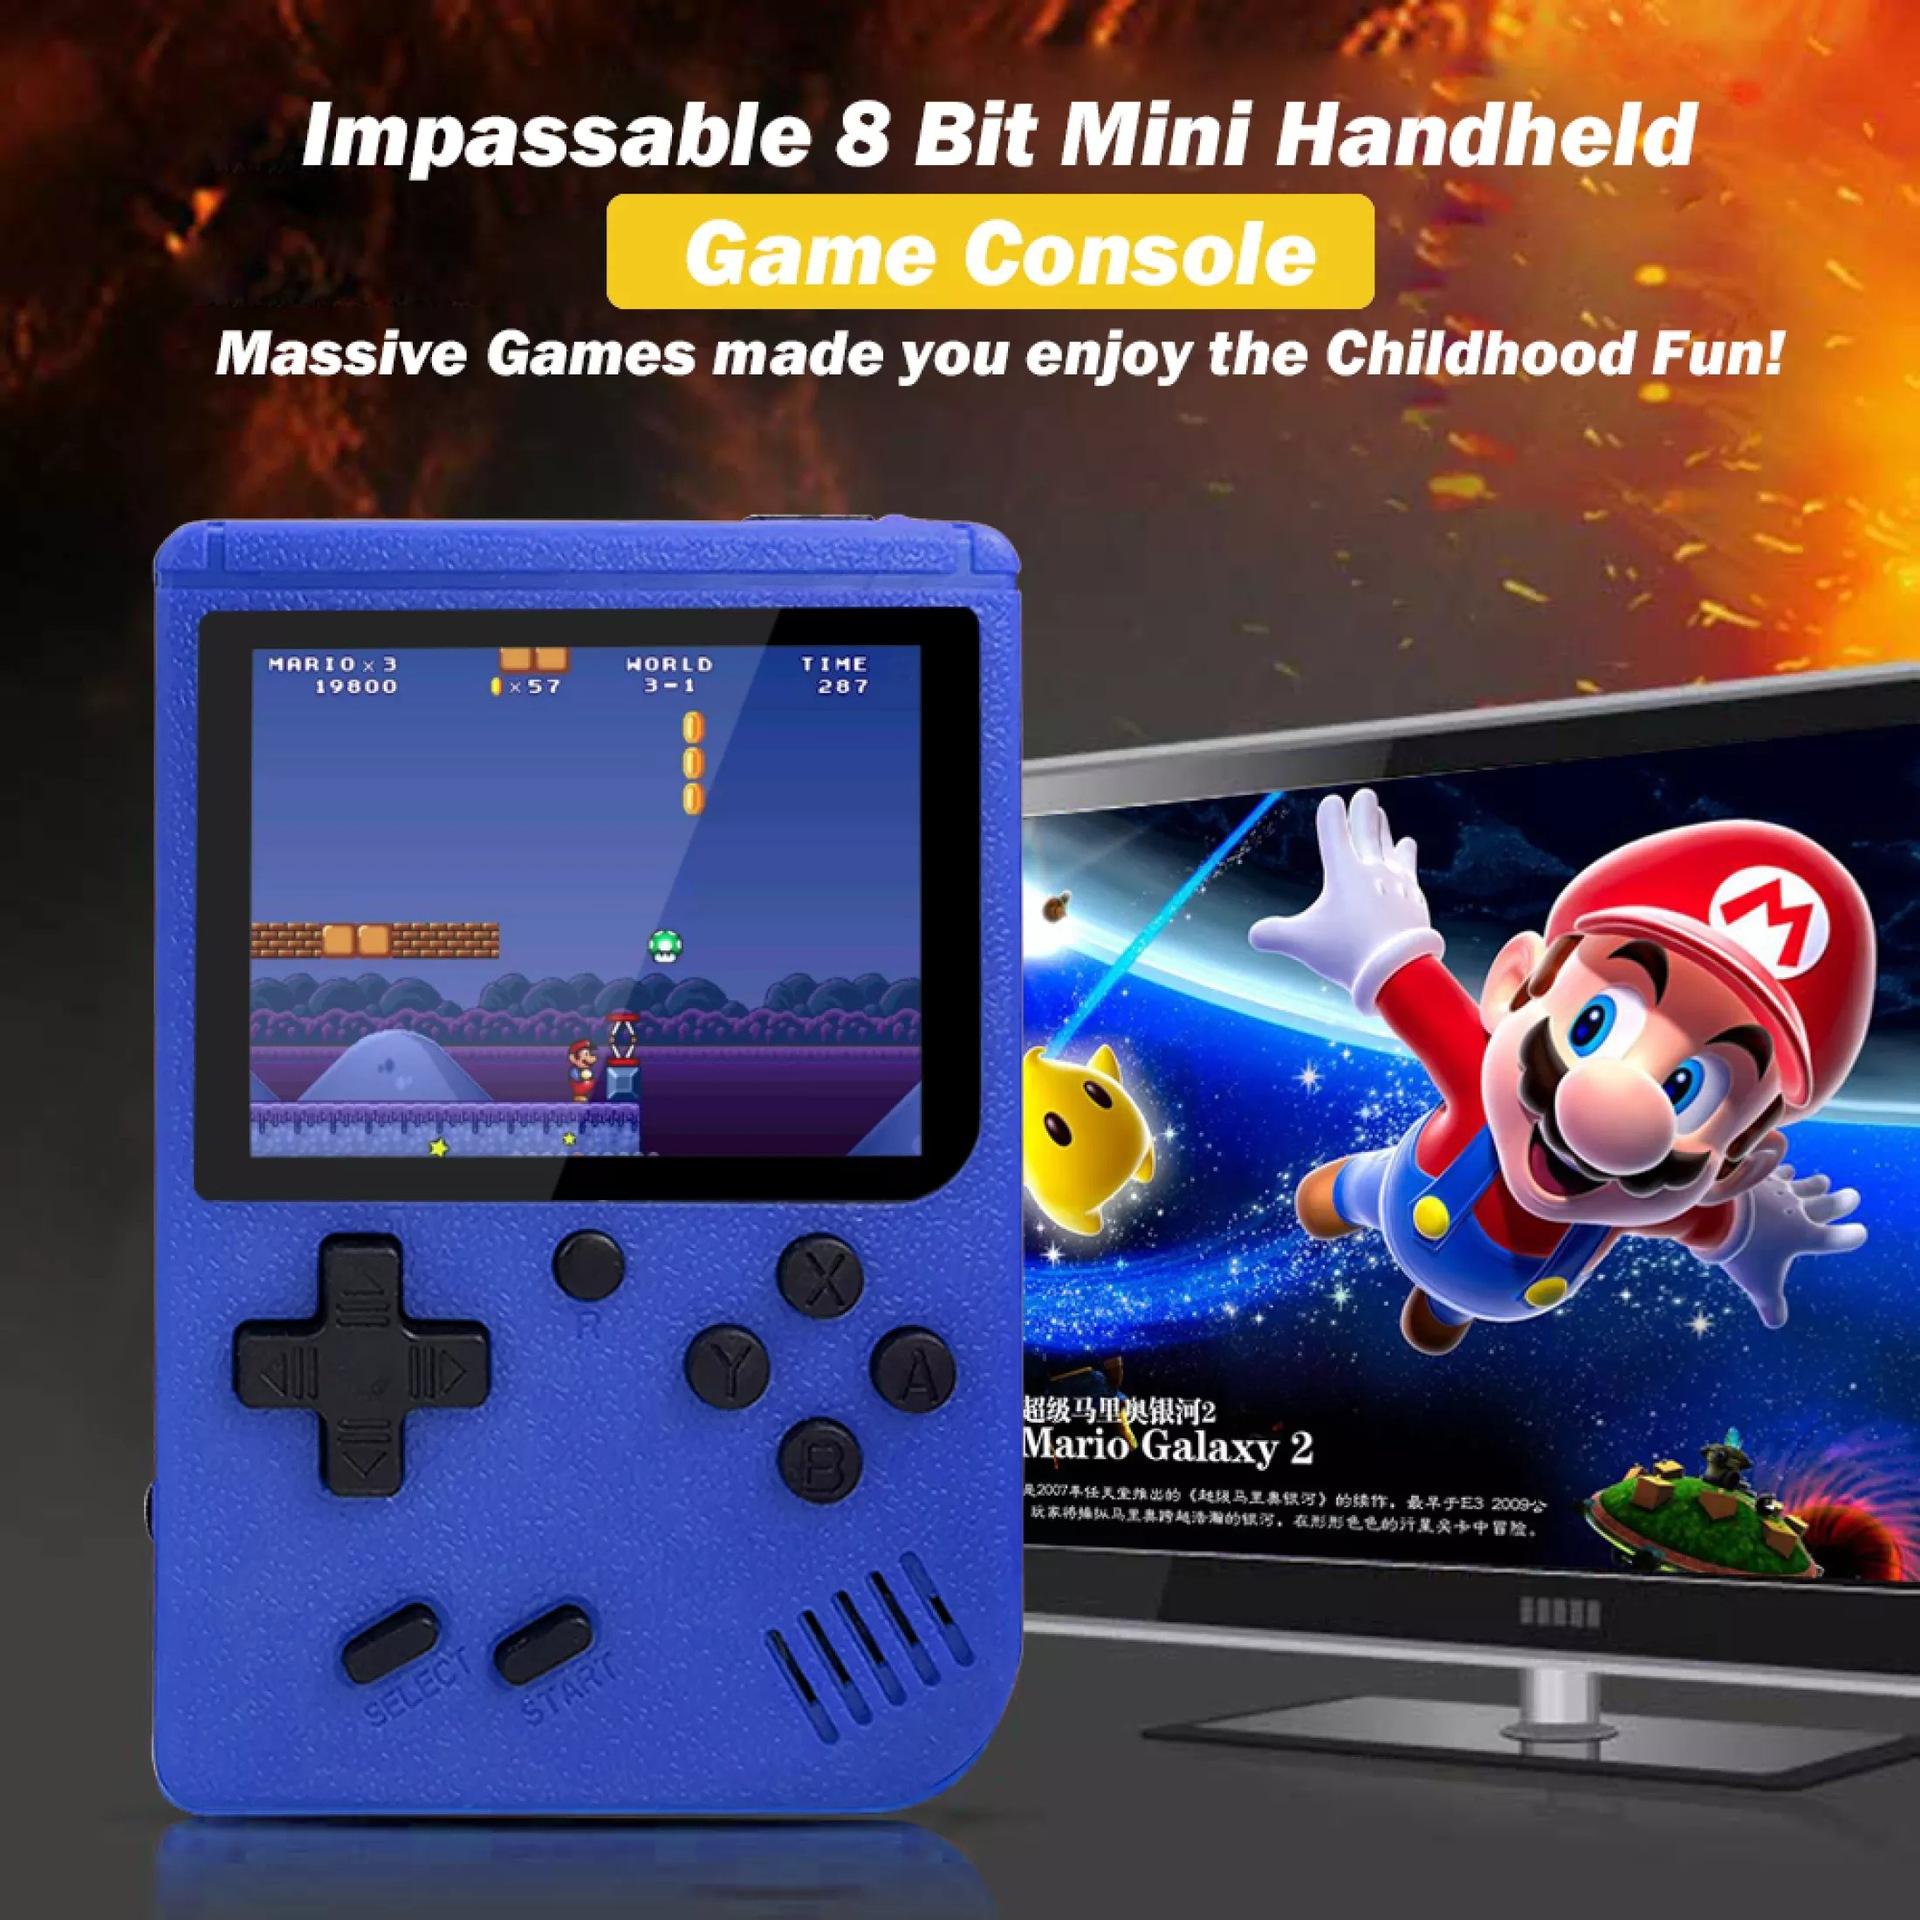 JY-Just for You Mini Retro Game Handheld Game Console Built-in 400 Games Box Classic Retro Gamepad Gift for Child Kids